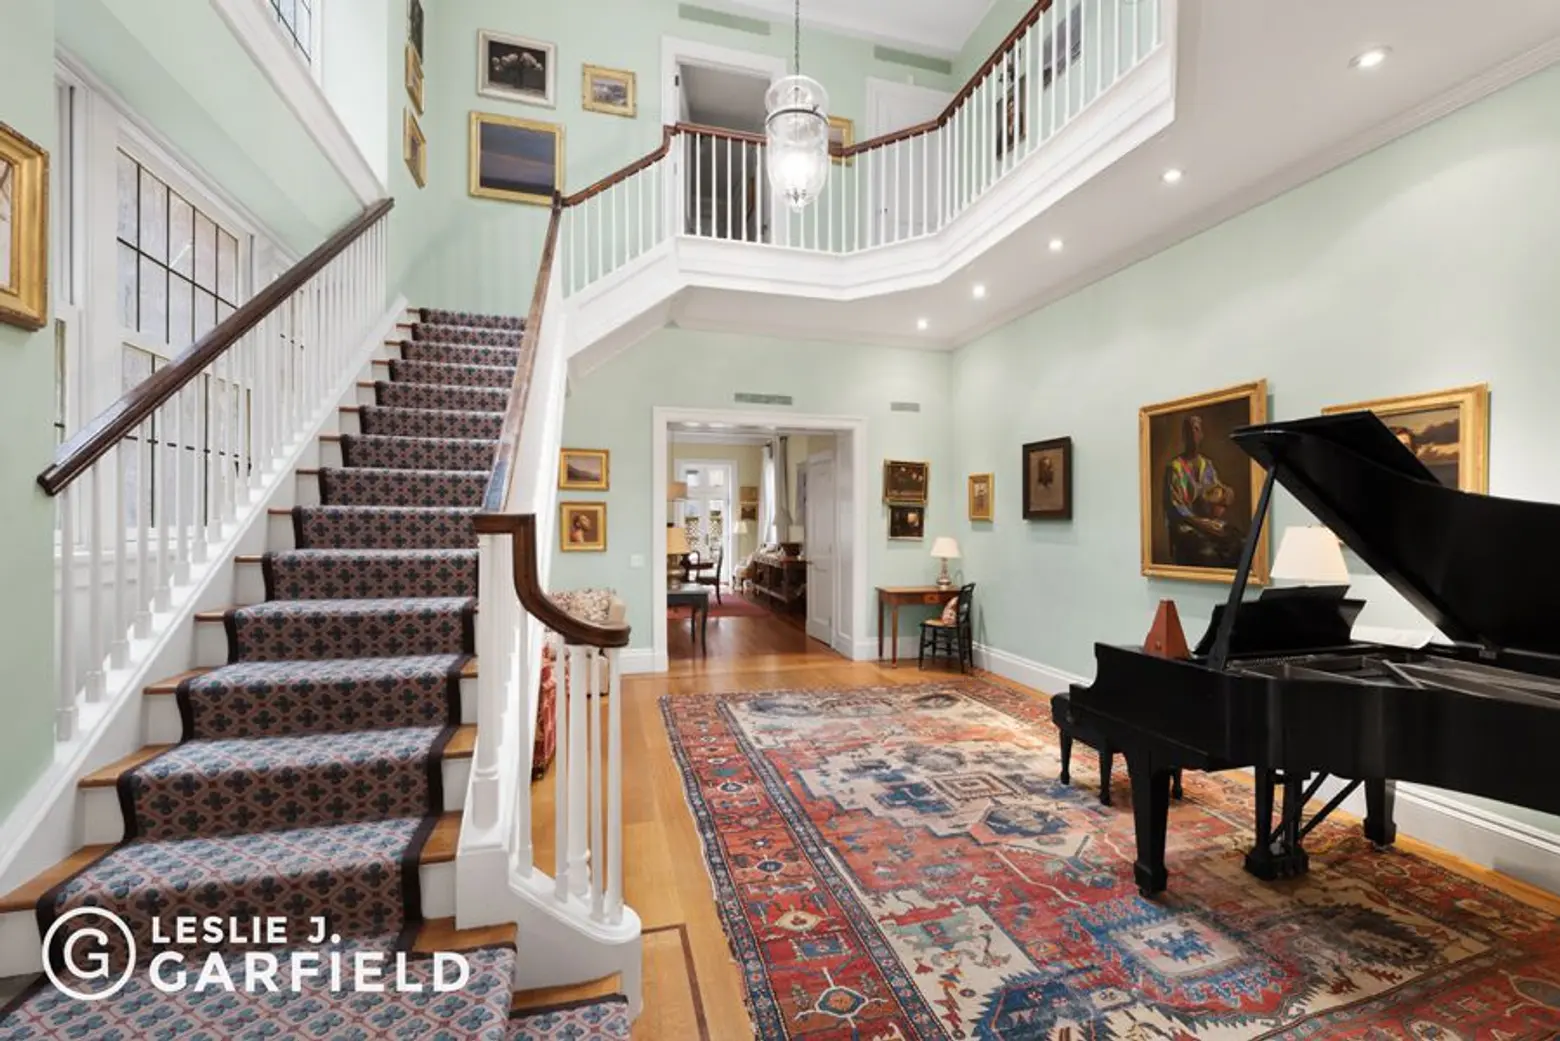 Upper East Side townhouse with an artistic pedigree, an artists’ studio and a curb cut asks $19M